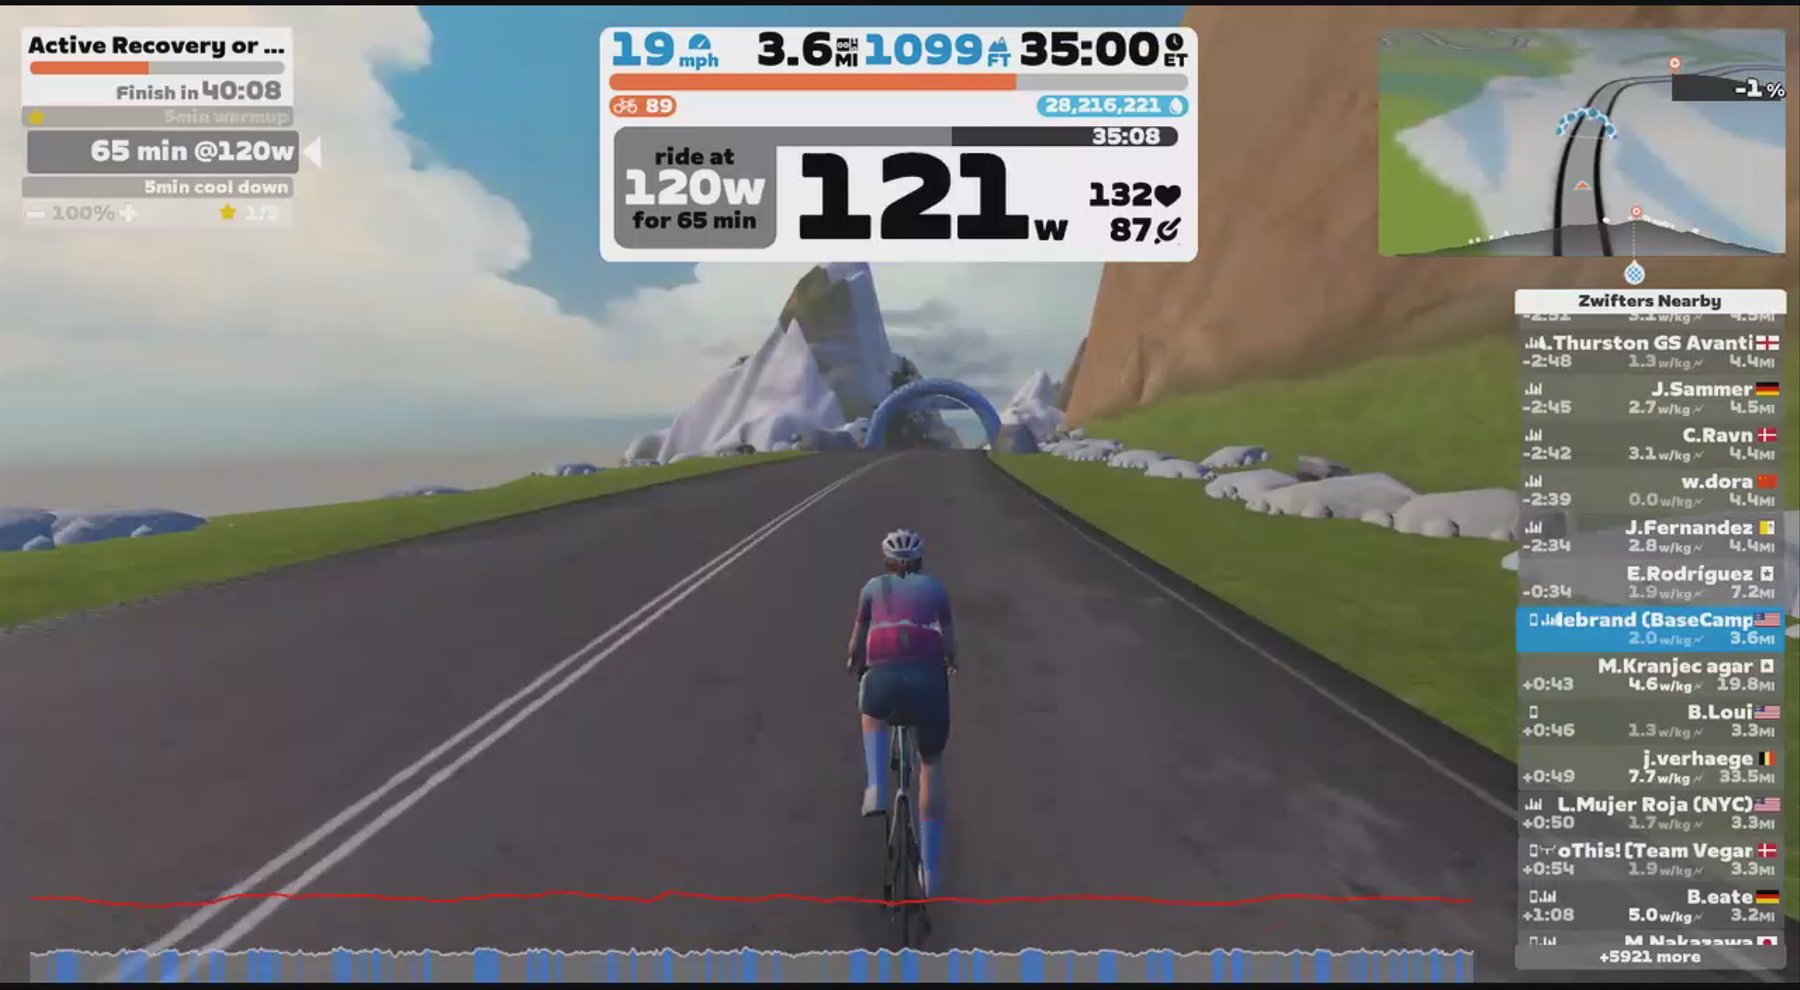 Zwift - Active Recovery or Off in Watopia